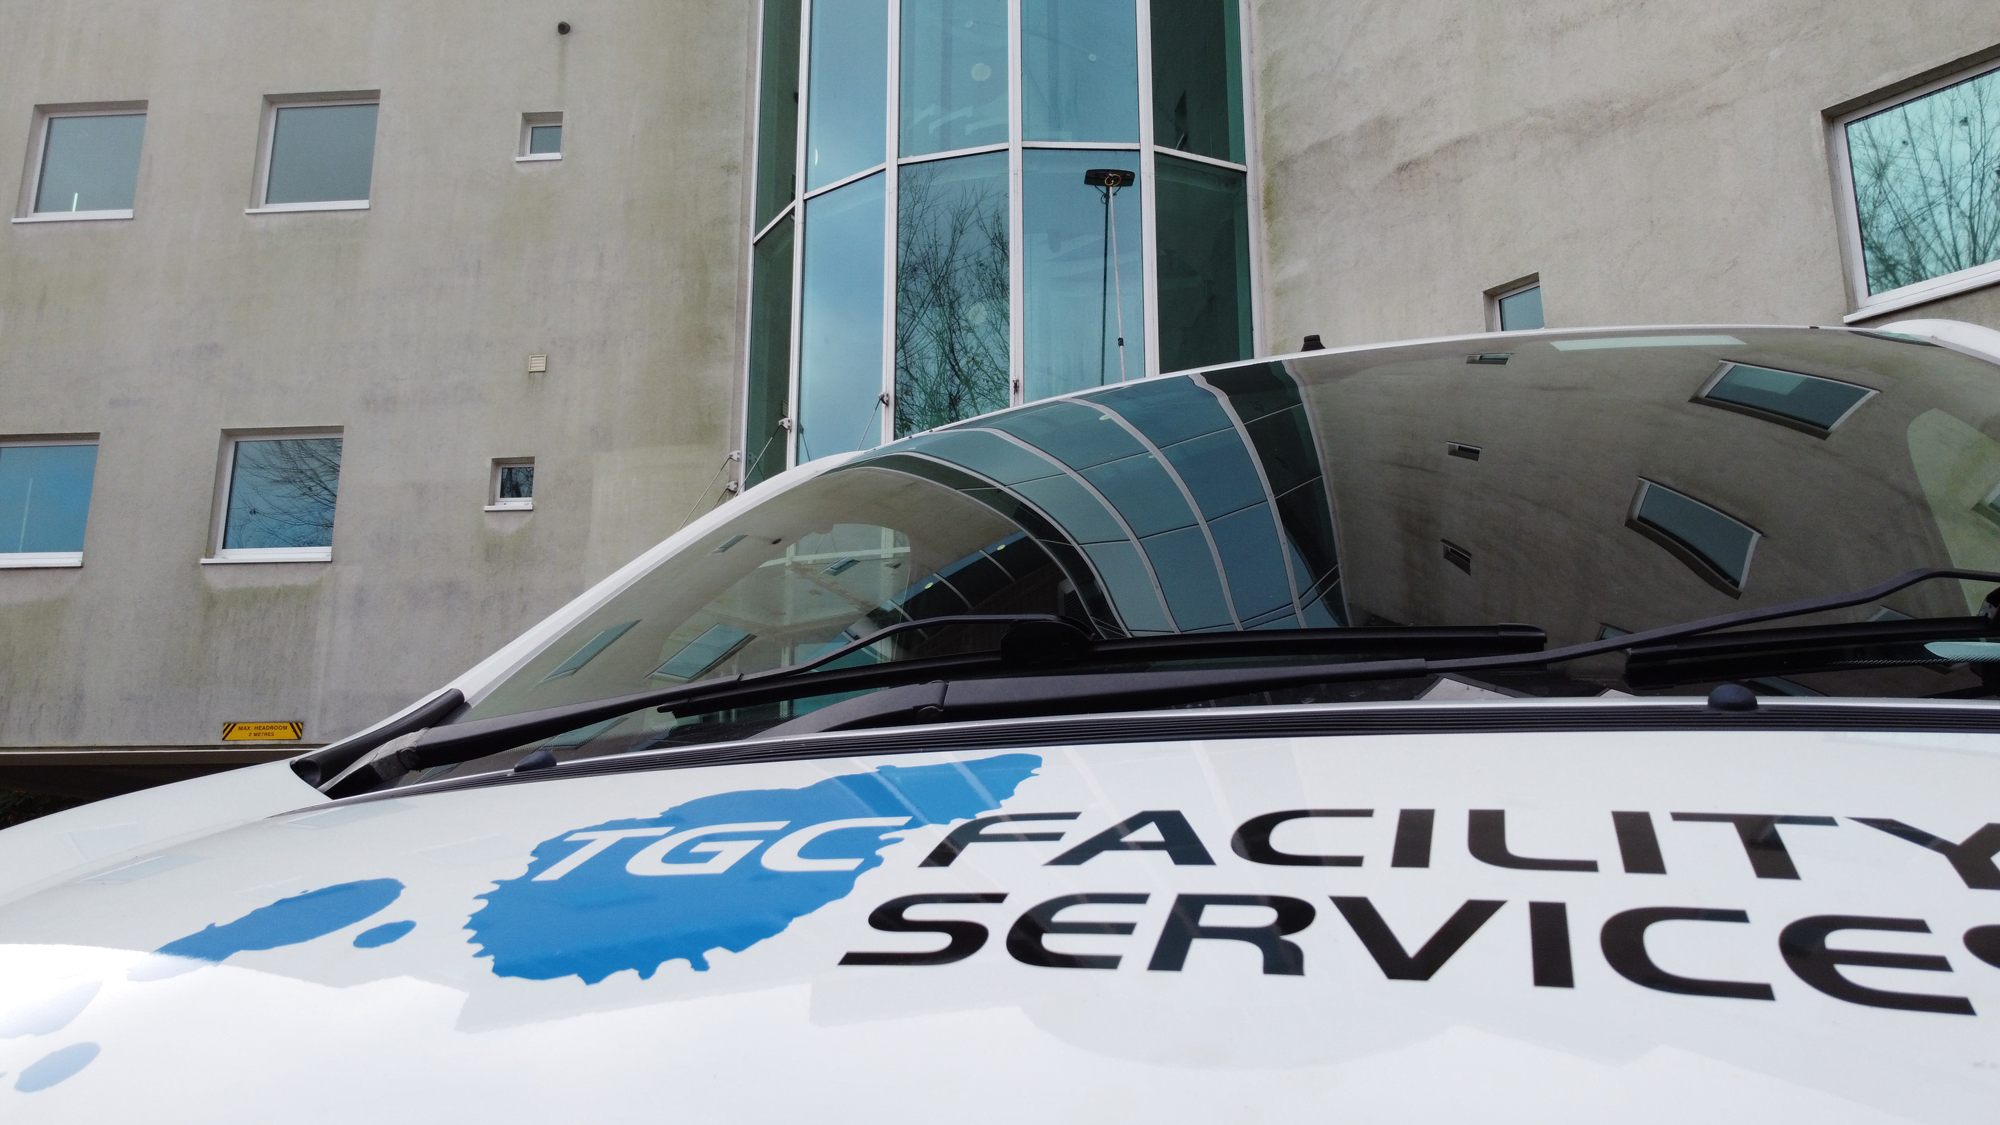 About TGC Facilities Services